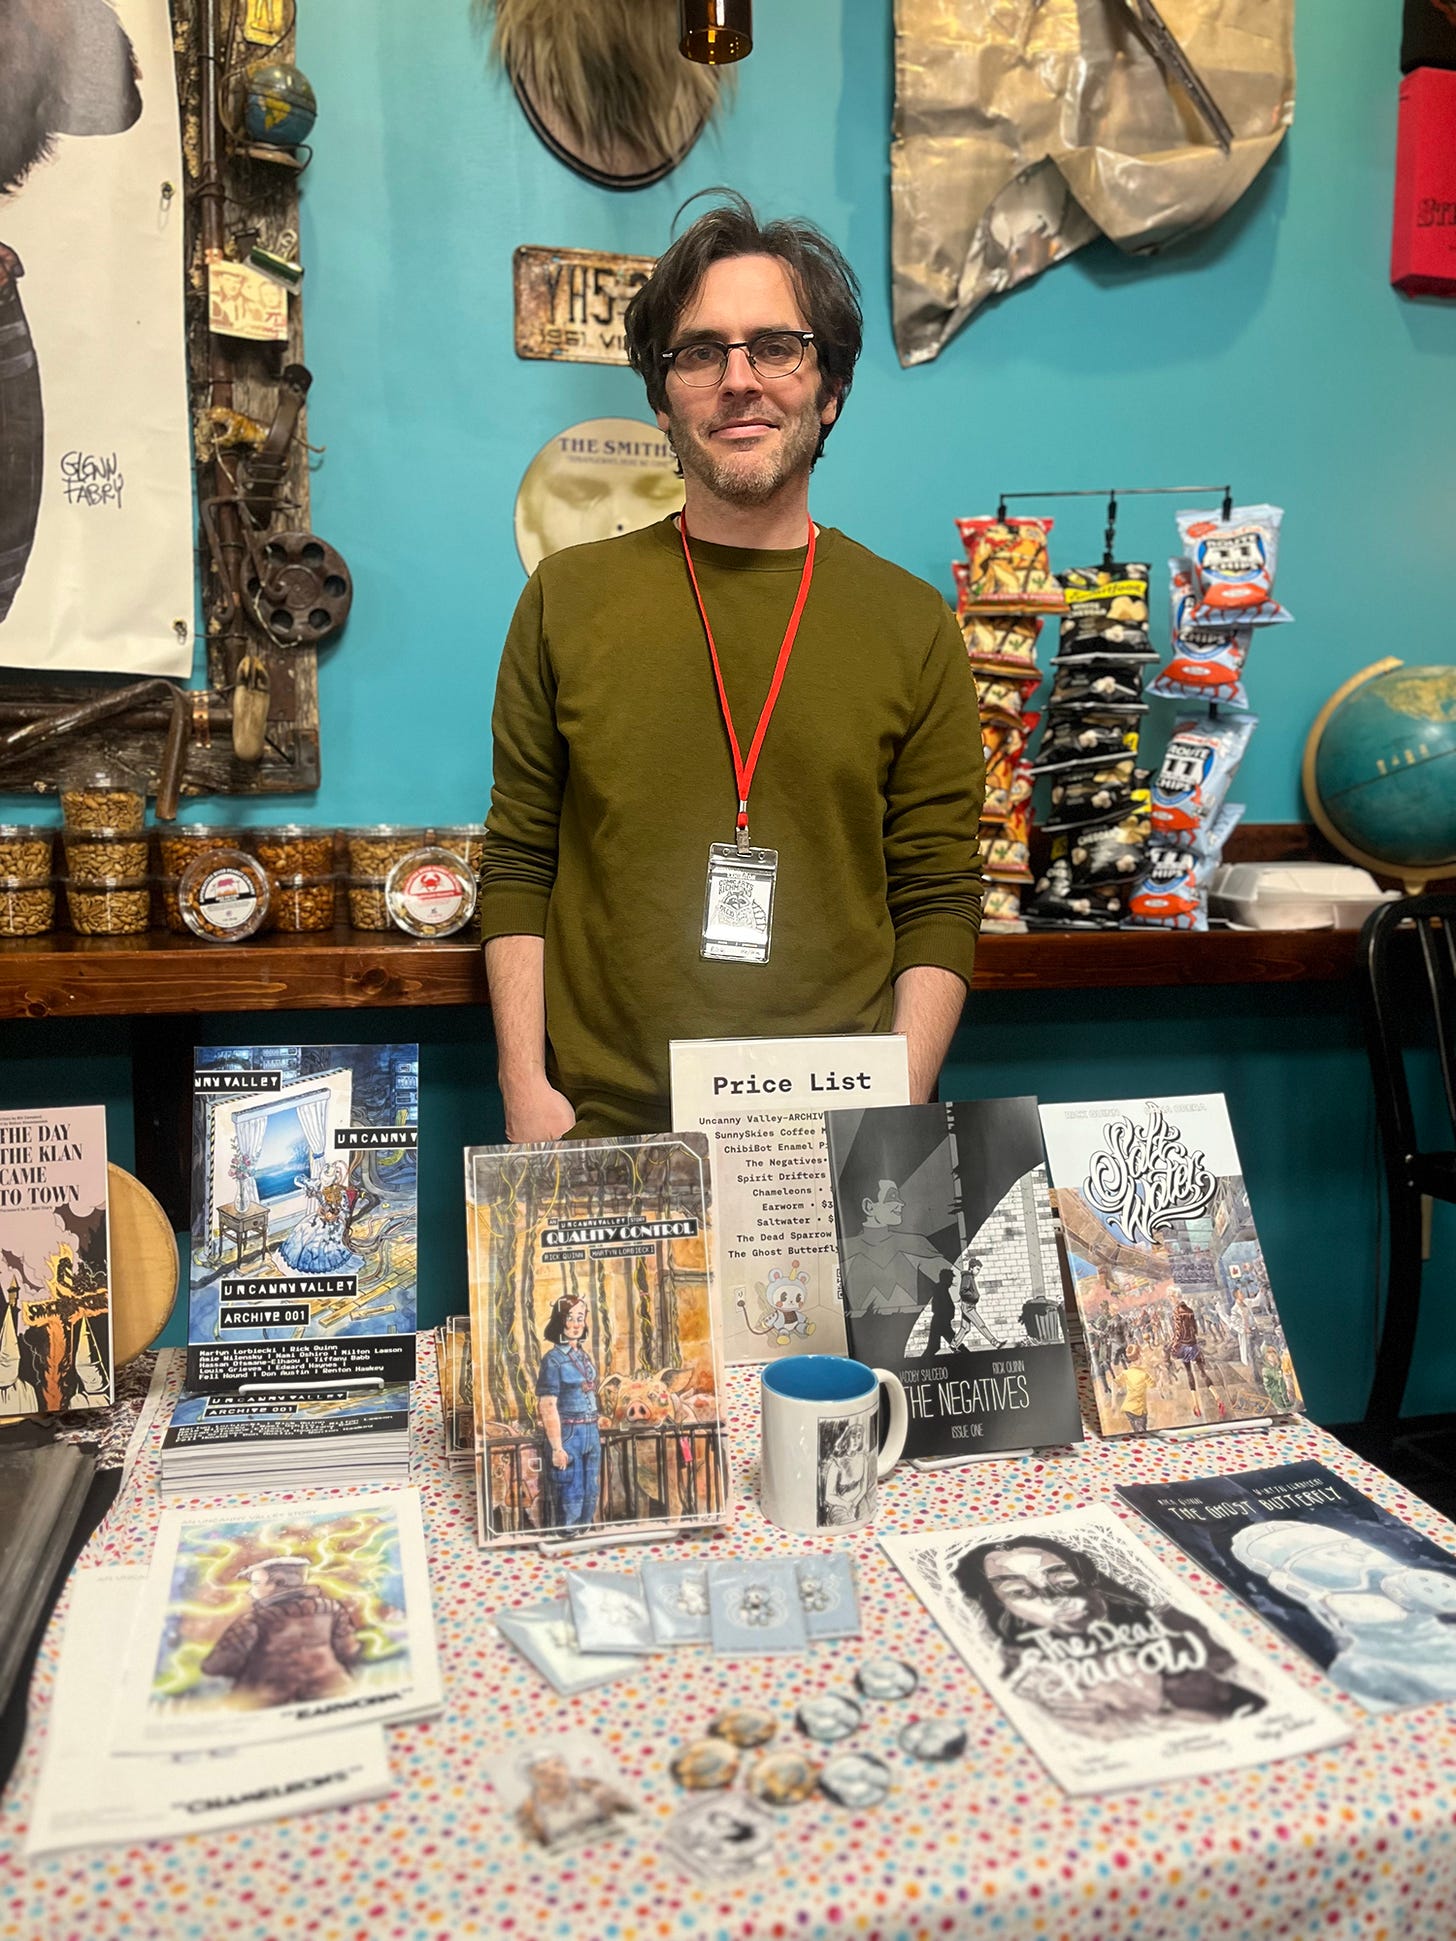 A gray-haired writer of things standing behind a table full of his self-published works.